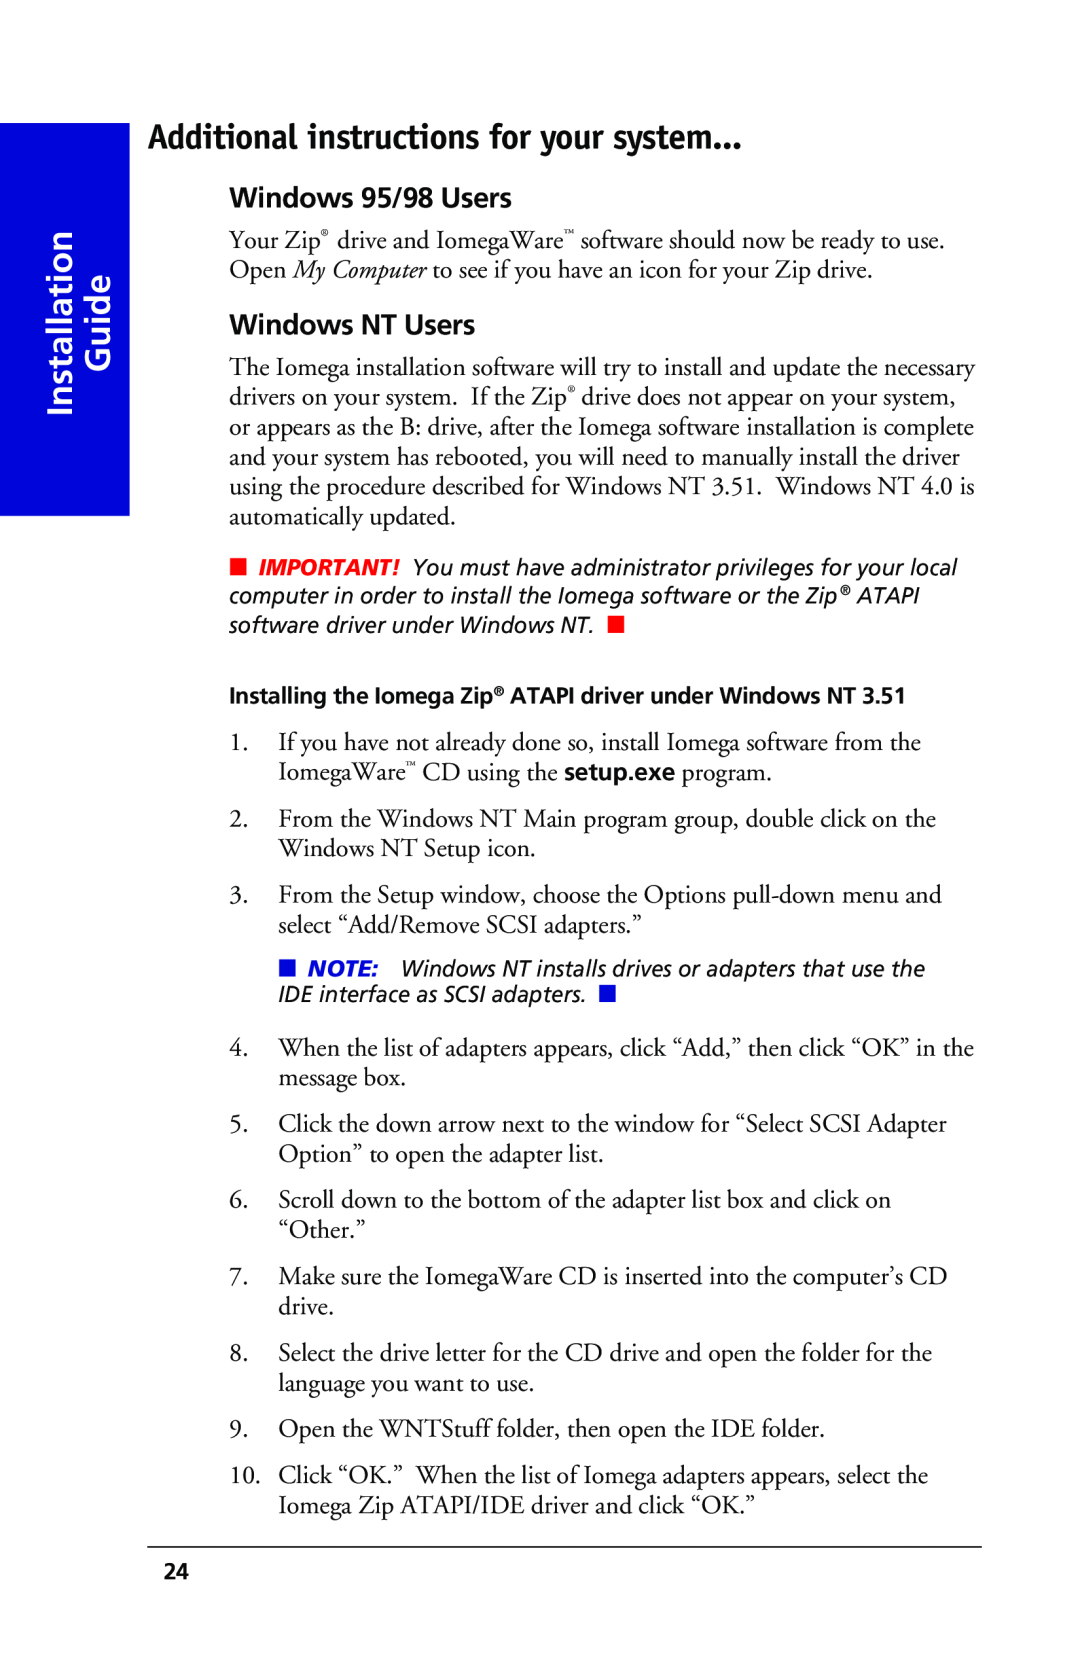 Iomega 03798300 Additional instructions for your system, Windows 95/98 Users, Windows NT Users, Installation Guide 